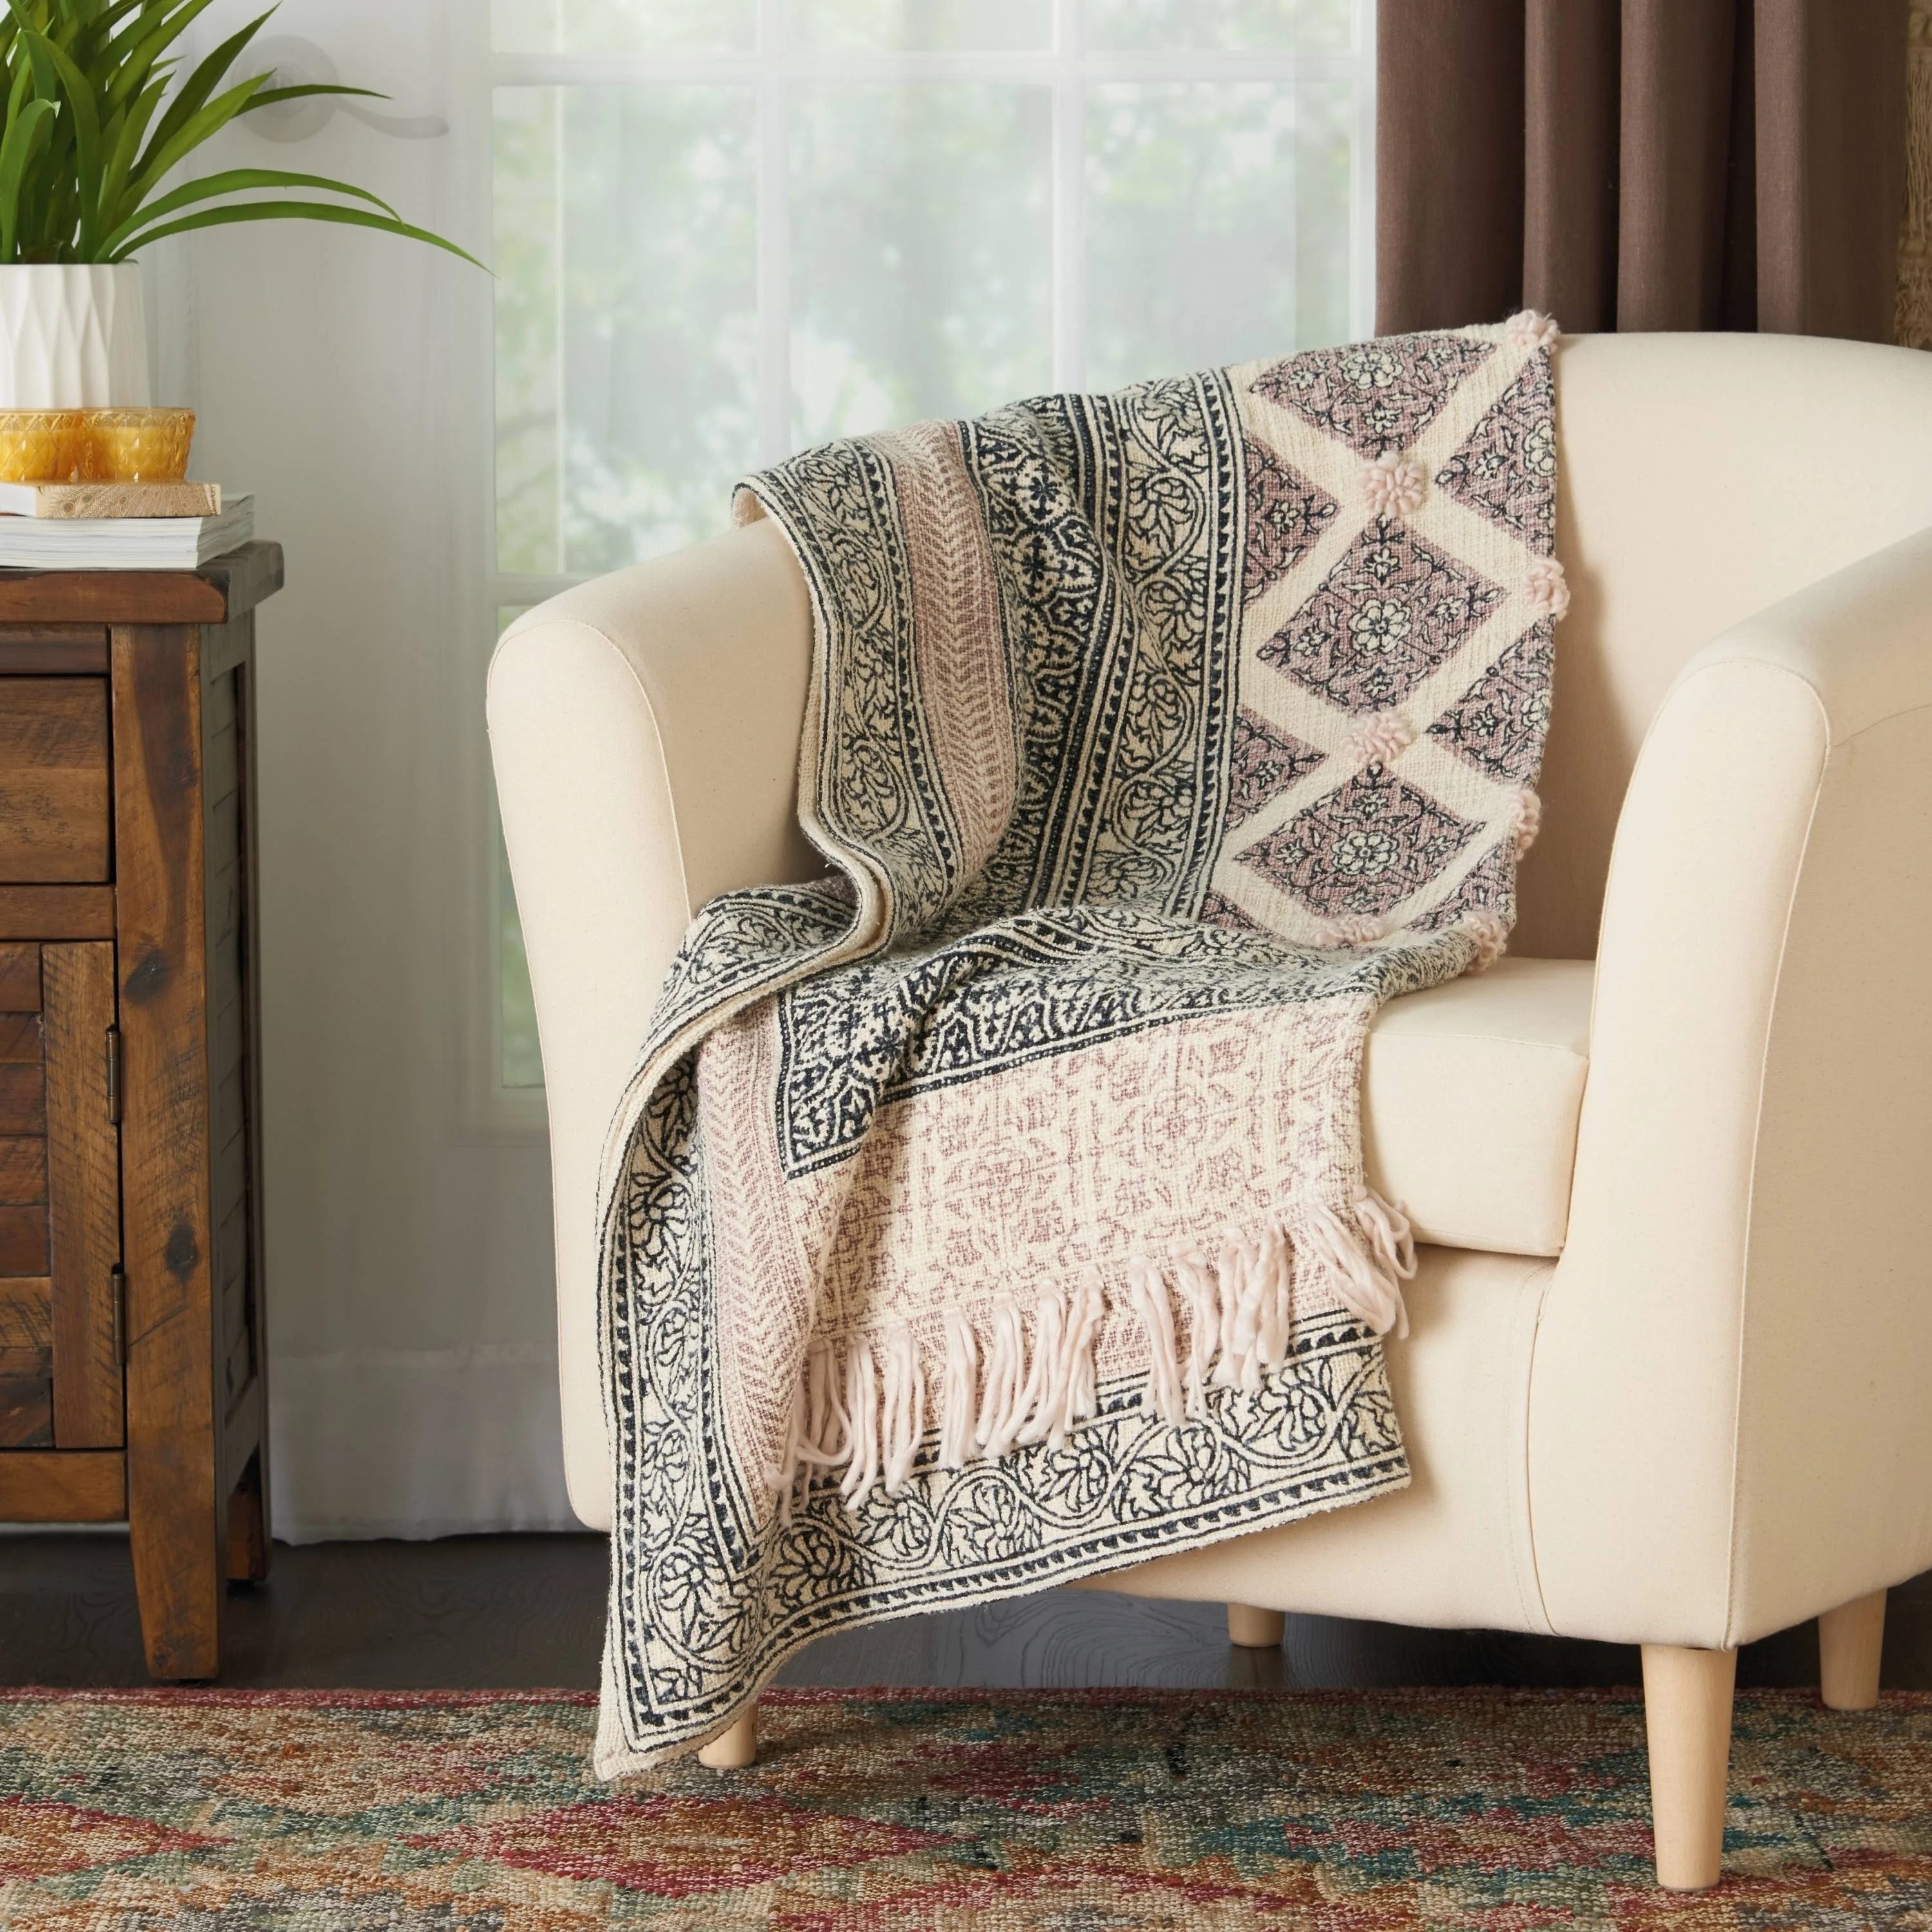 Mina Victory Floral Decorative Throw, Natural 100% Cotton Blanket with Botanical Pattern and Tassel Detail | Image